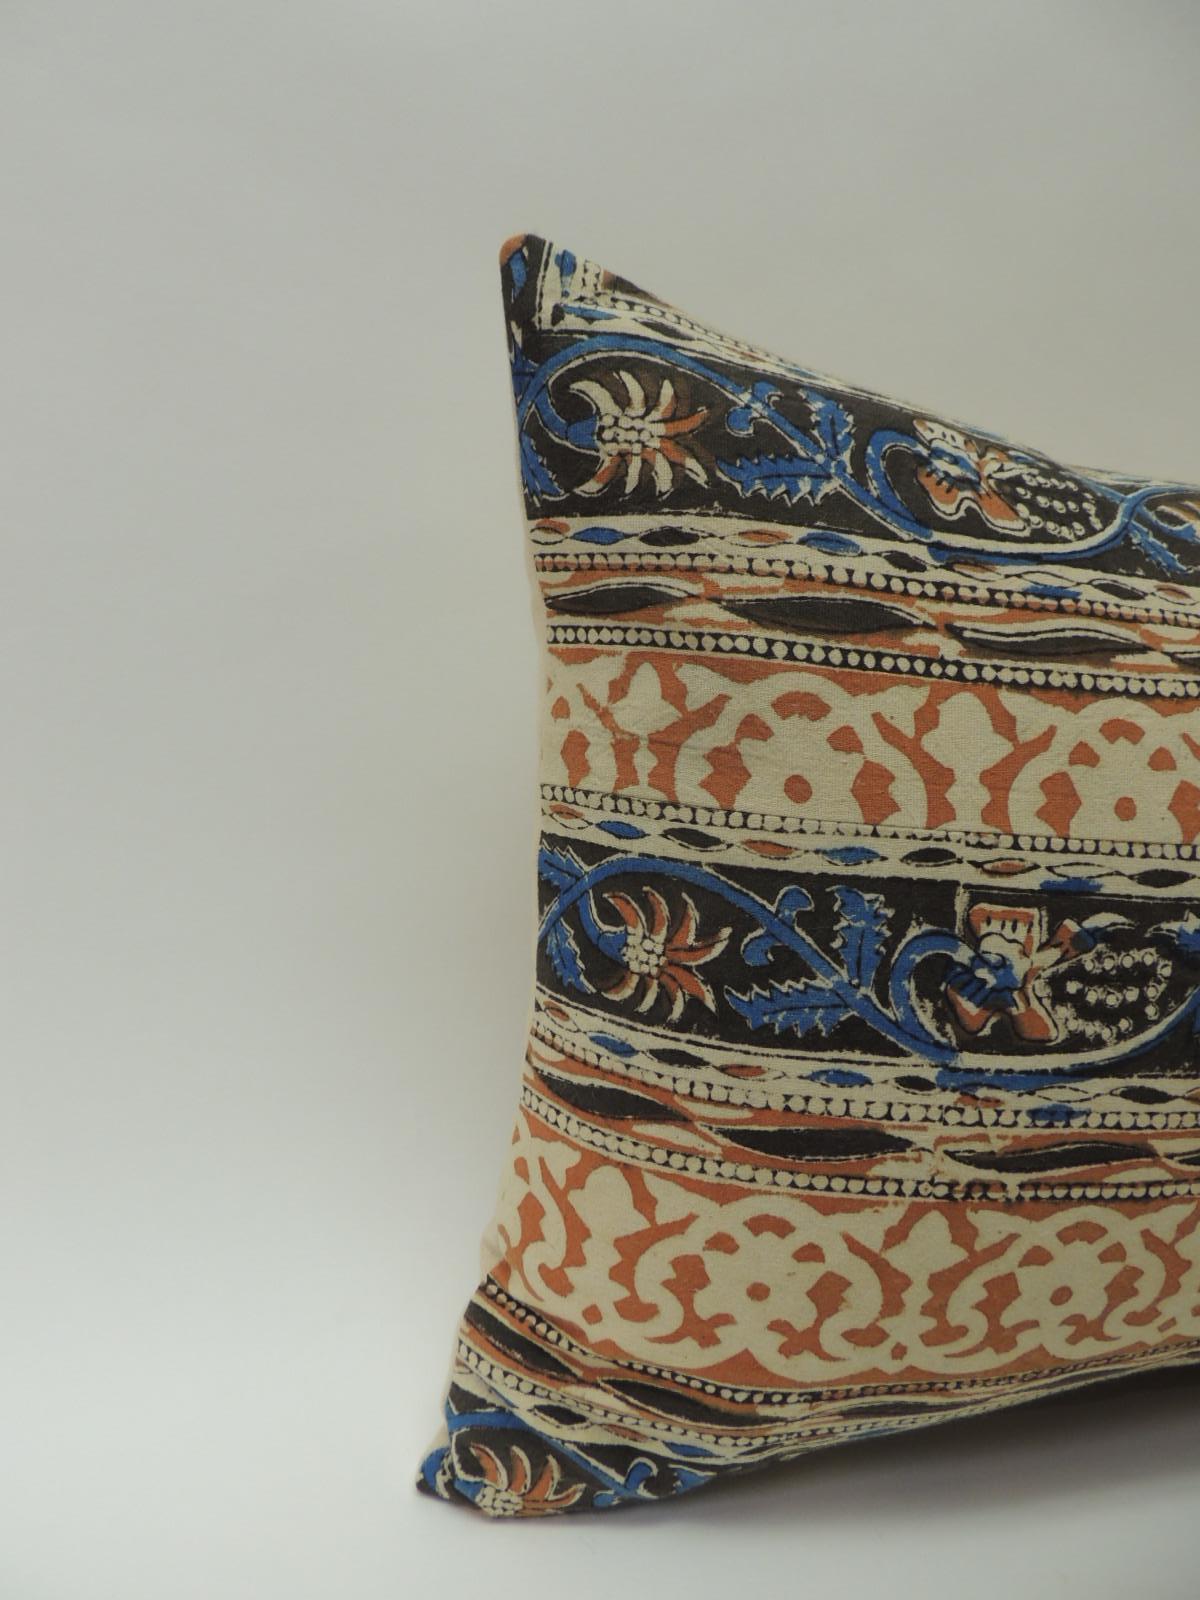 Vintage Indian hand-blocked artisanal textile decorative Bolster pillow.
Decorative throw bolster pillow handcrafted with a hand-blocked floral vintage cotton artisanal Indian hand-blocked textile panel depicting horizontal stripes and finished